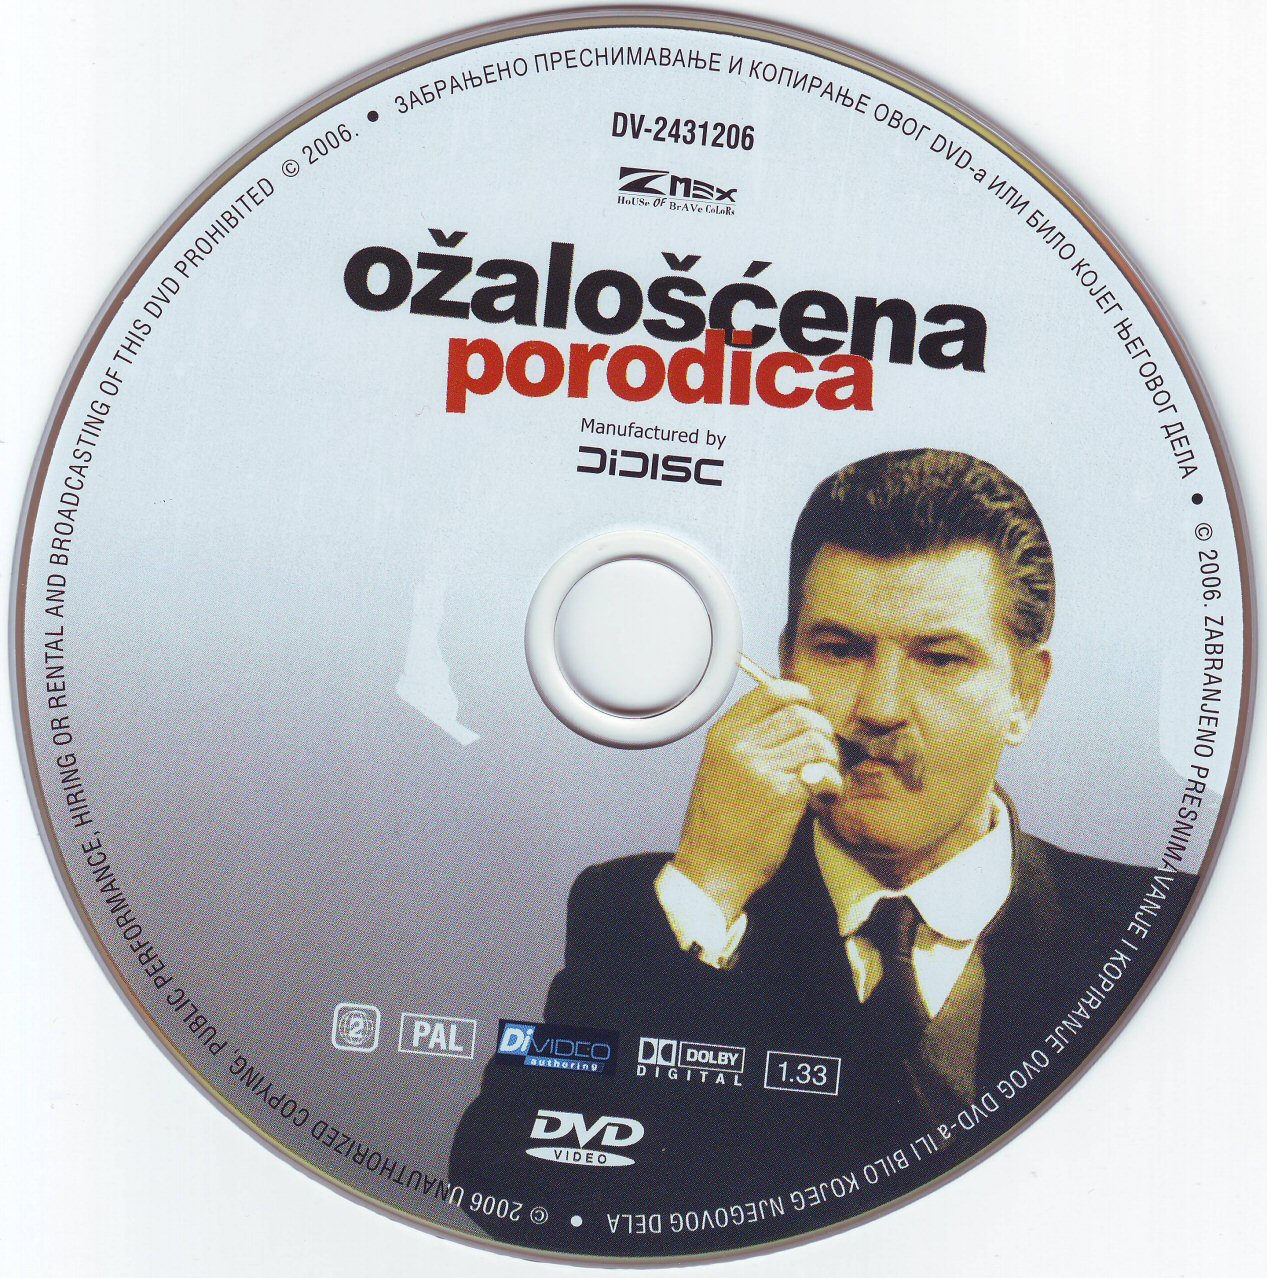 Click to view full size image -  DVD Cover - O - DVD - OZALOSCENA PORODICA - CD - DVD - OZALOSCENA PORODICA - CD.jpg